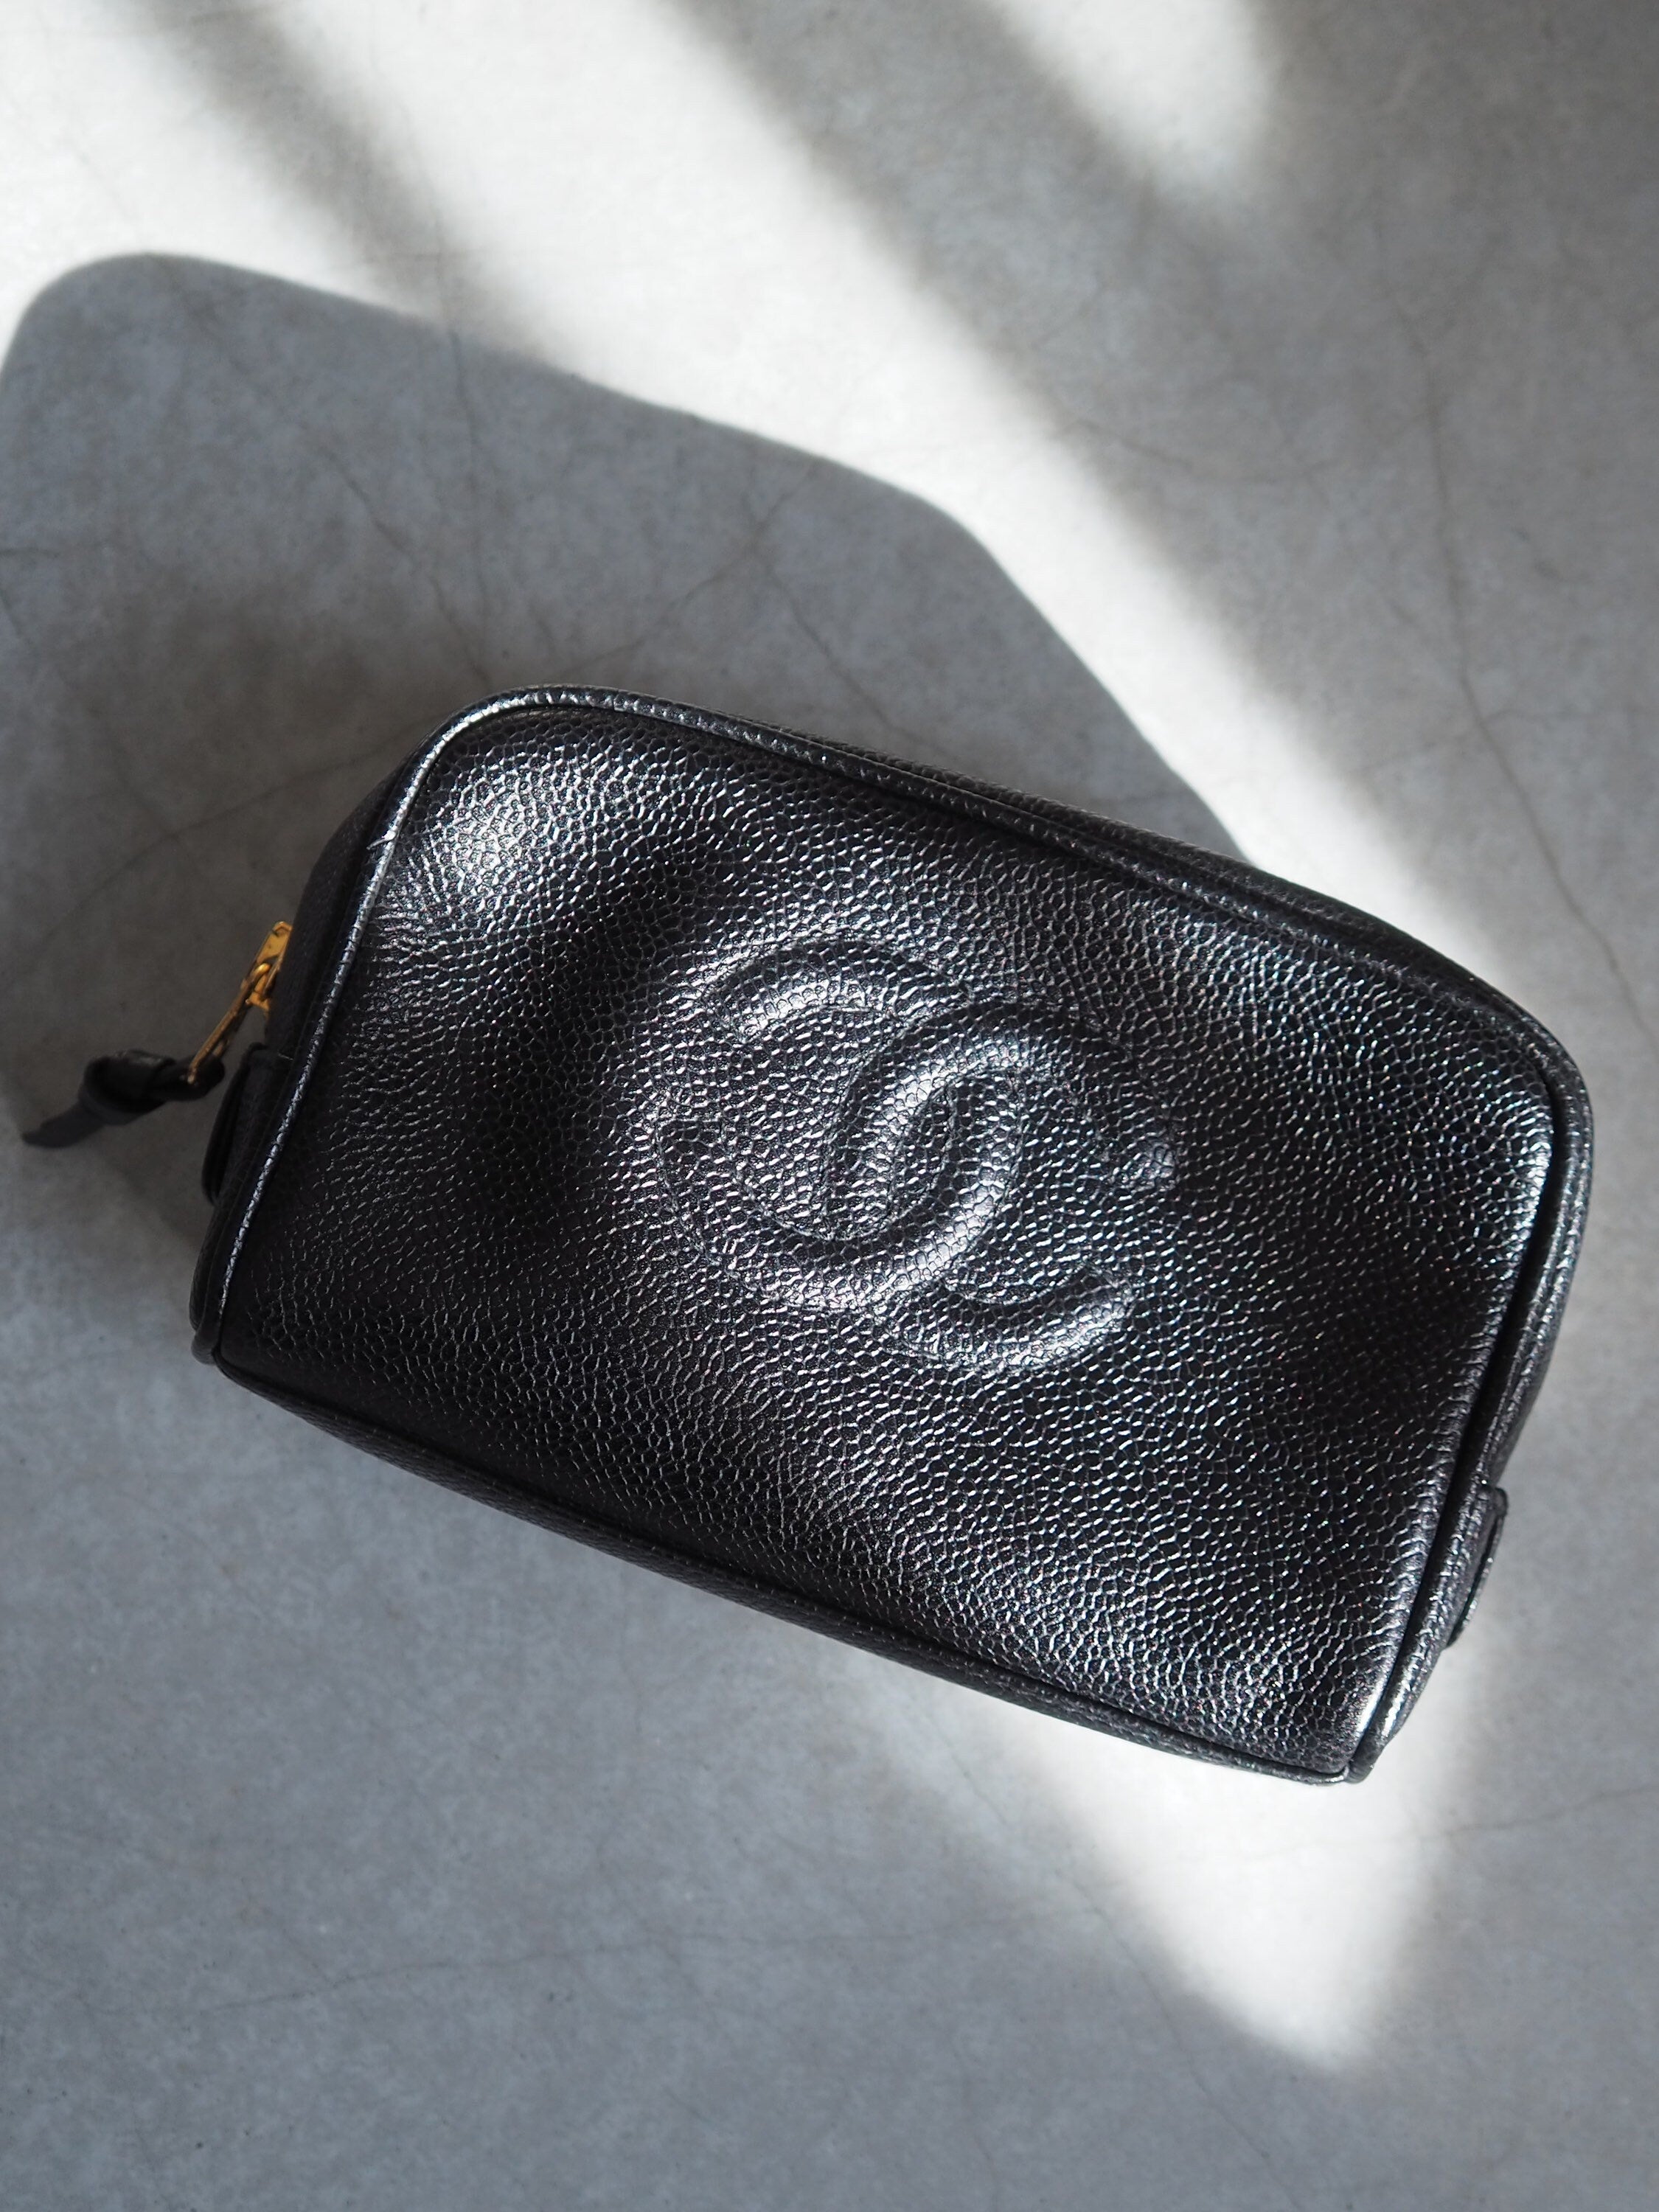 CHANEL COCO Mark Cosmetic Pouch Purse Caviar Skin Leather Black Authentic Vintage